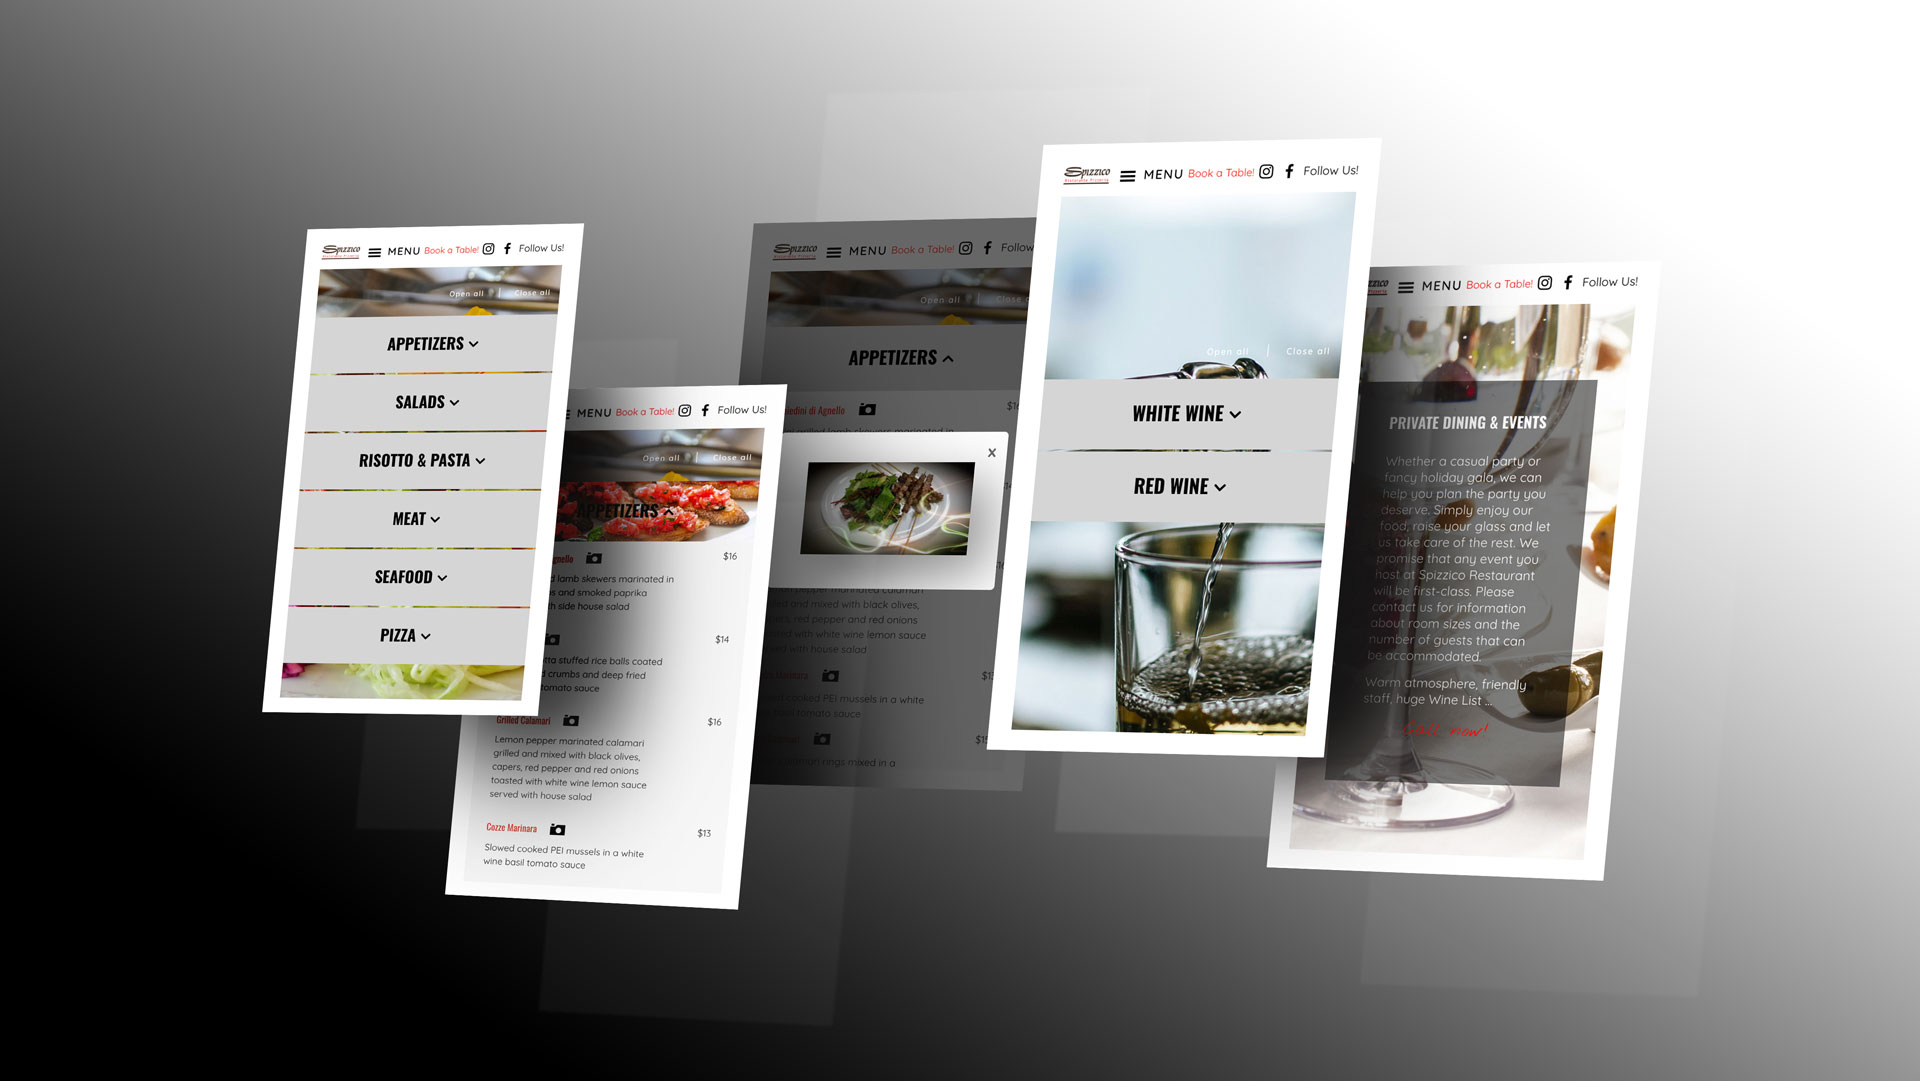 PixelUp's display exhibits the custom website design of Spizzico Restaurant. It features 5 isometric iPhone screens displaying various pages to demonstrate the design's responsiveness. Spizzico Restaurant's website stands as one of PixelUp's projects.